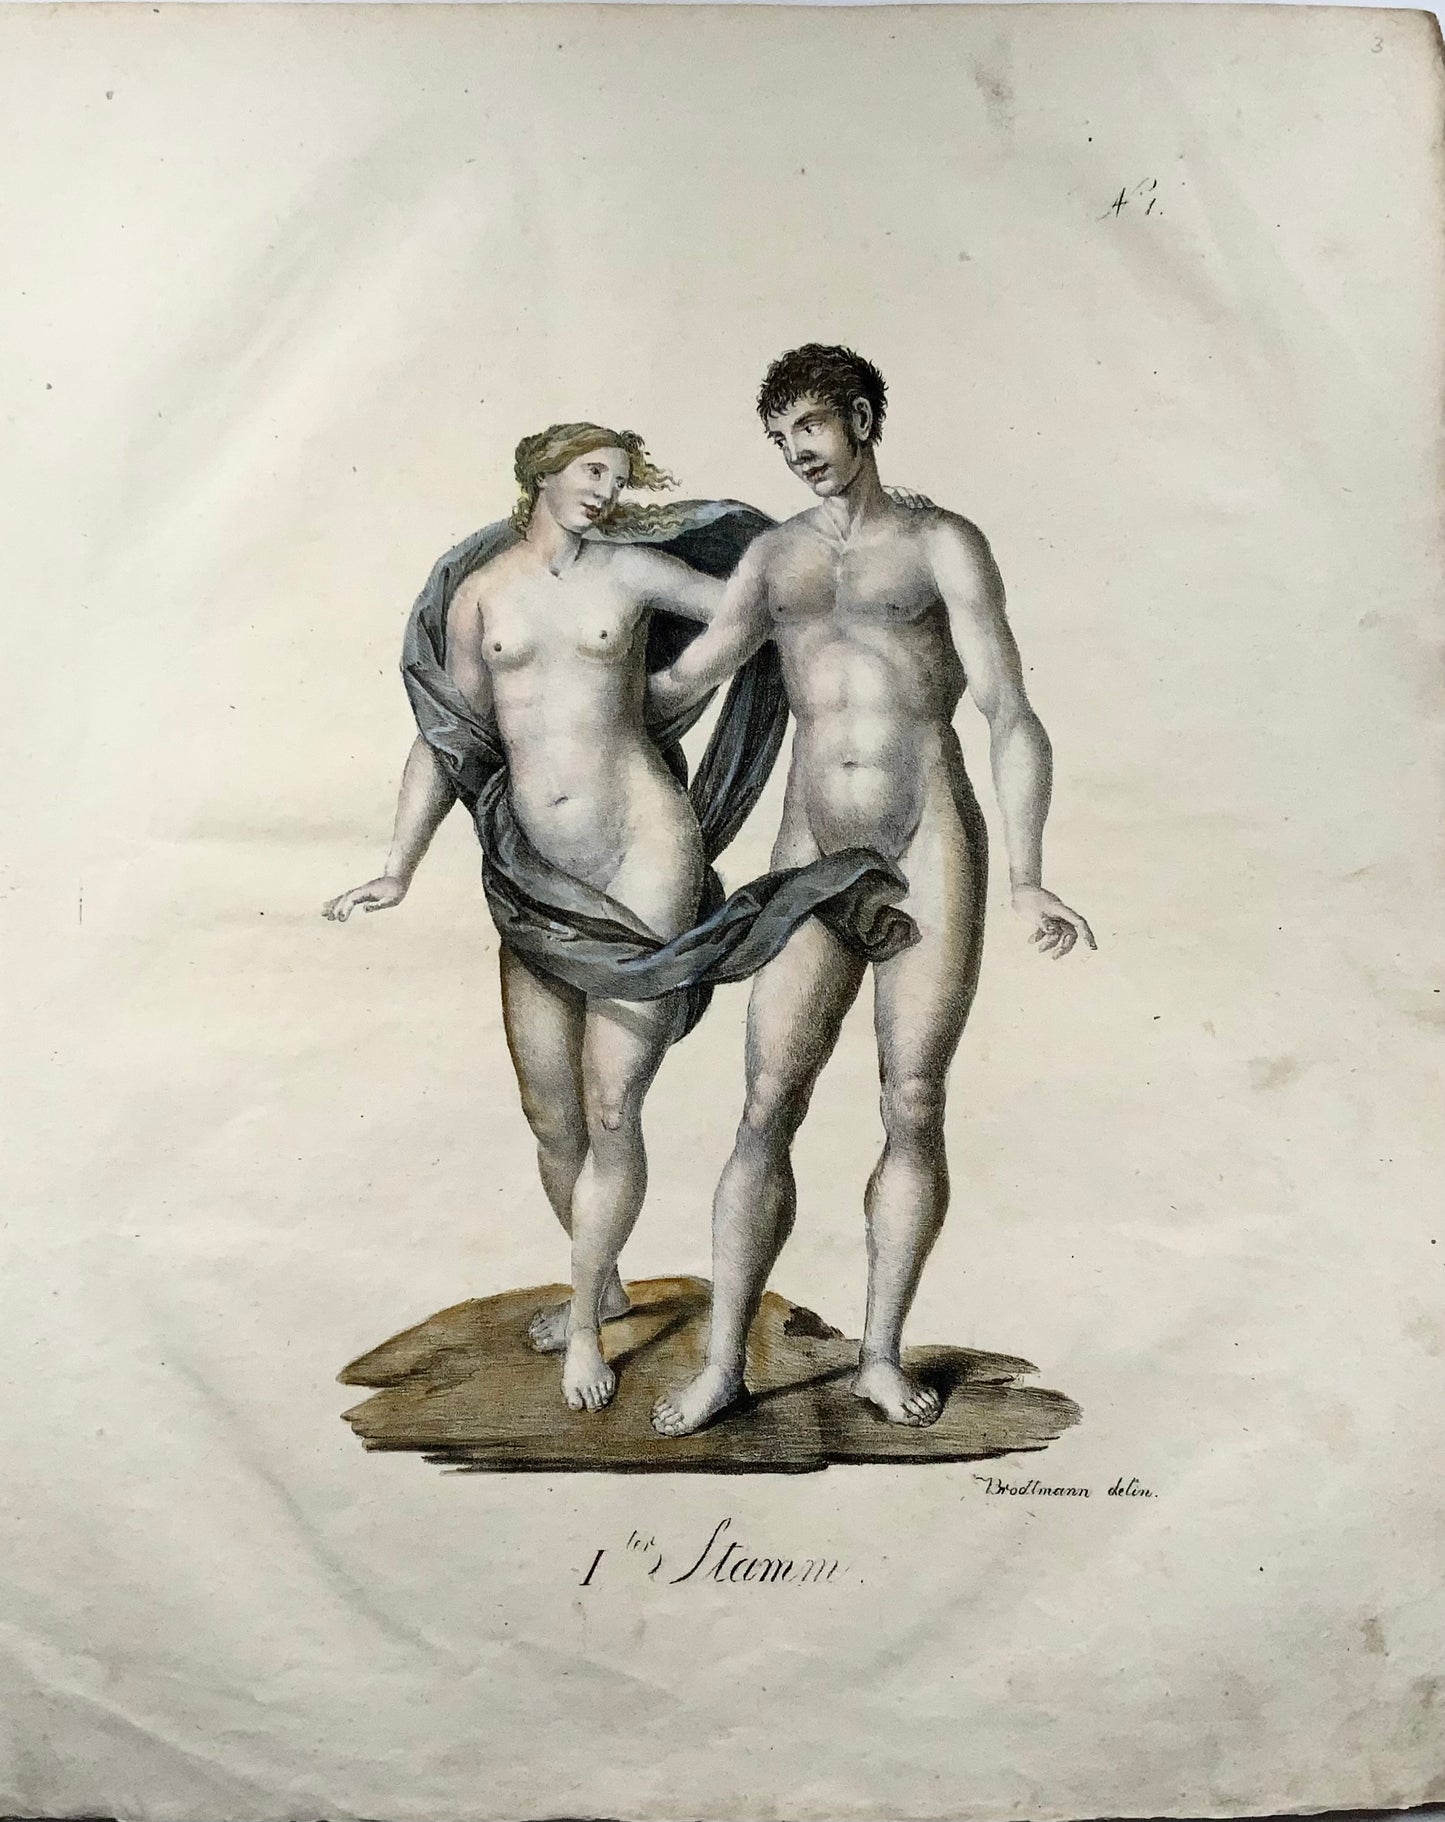 1816 Adam and Eve, Brodtmann, Imp. folio 42.5 cm, lithography in crayon manier, ethnology